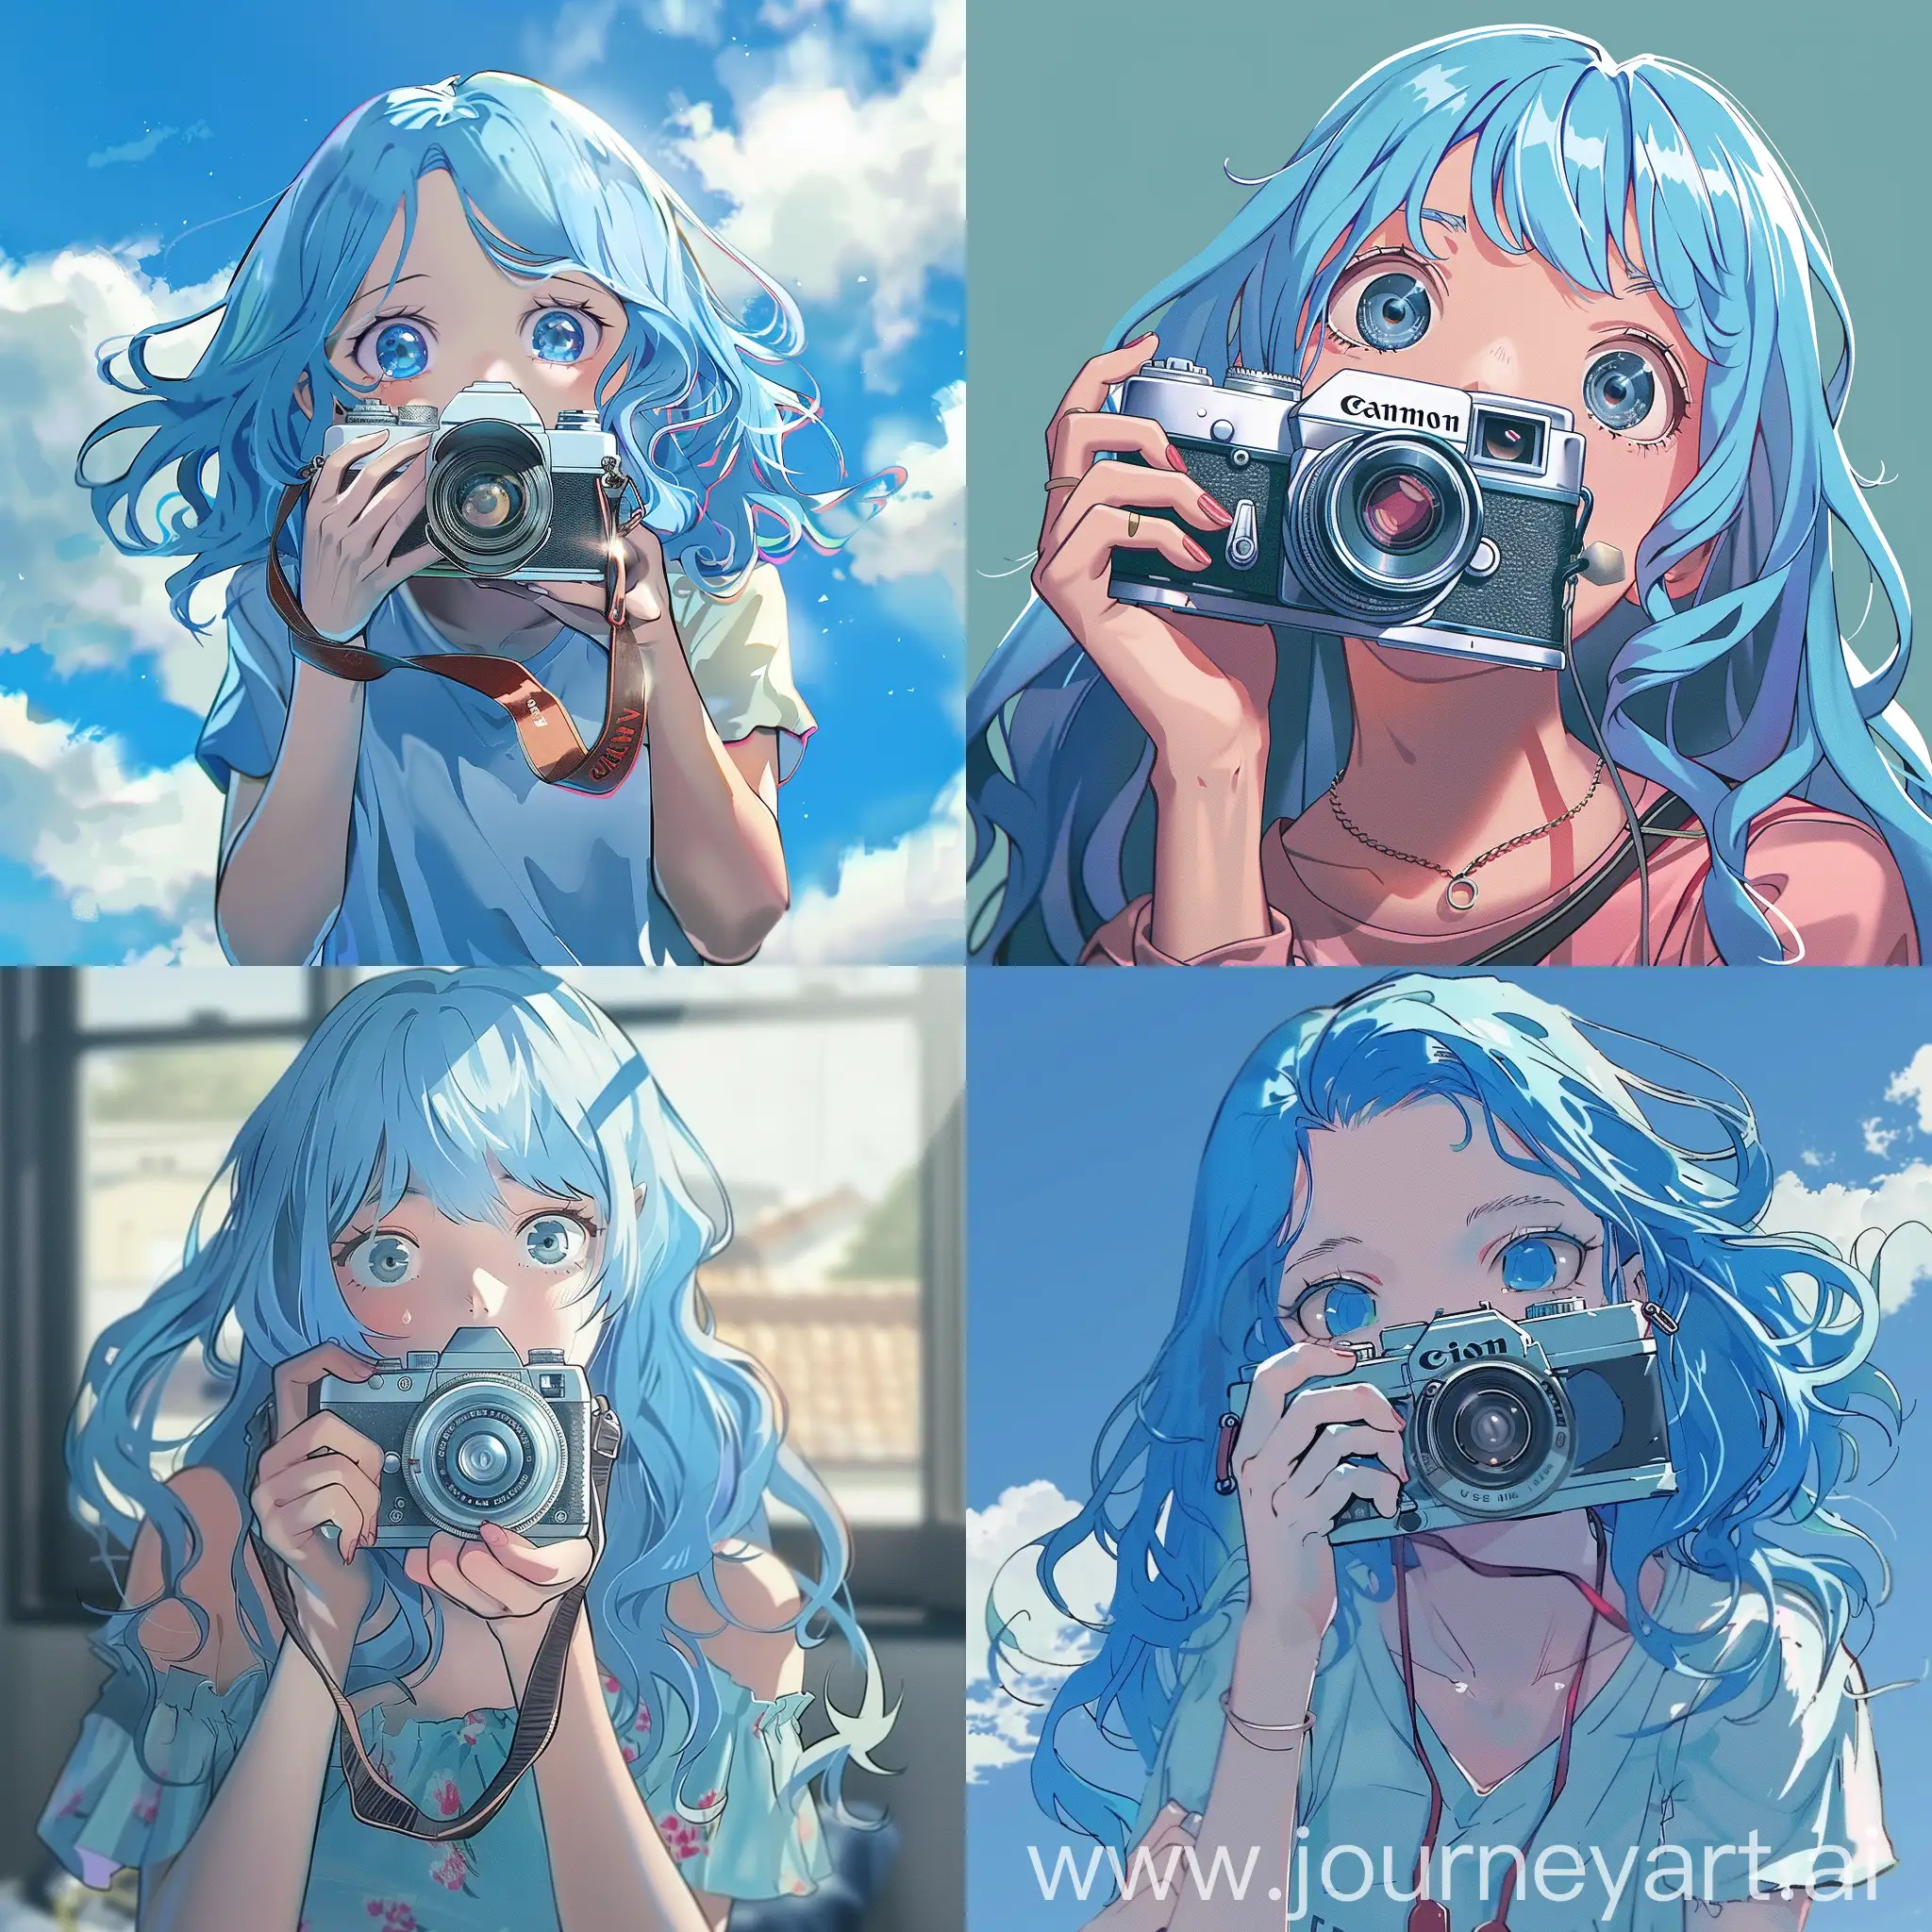 Anime-Girl-with-Blue-Hair-Capturing-Selfie-with-MouthHeld-Camera